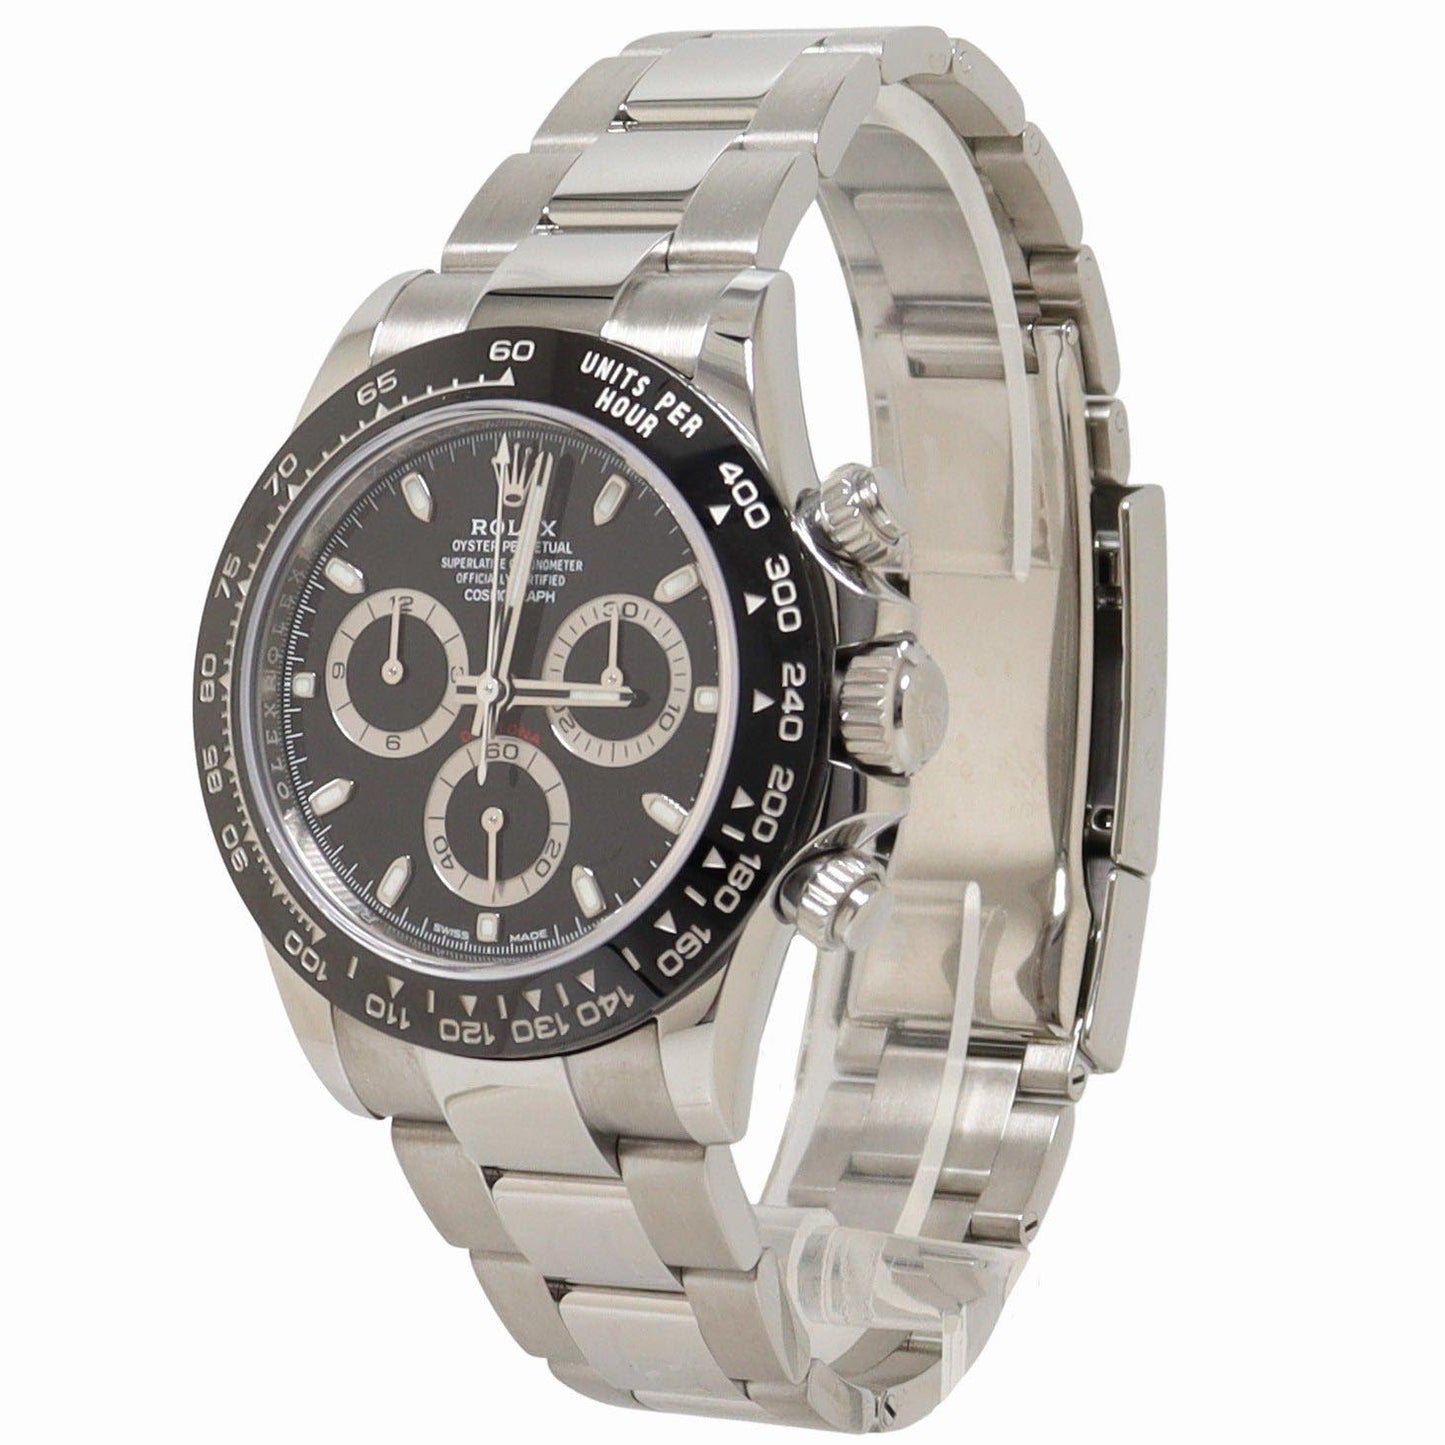 Load image into Gallery viewer, Rolex Daytona 40mm Stainless Steel Black Chronograph Dial Watch Reference#: 116500LN - Happy Jewelers Fine Jewelry Lifetime Warranty
